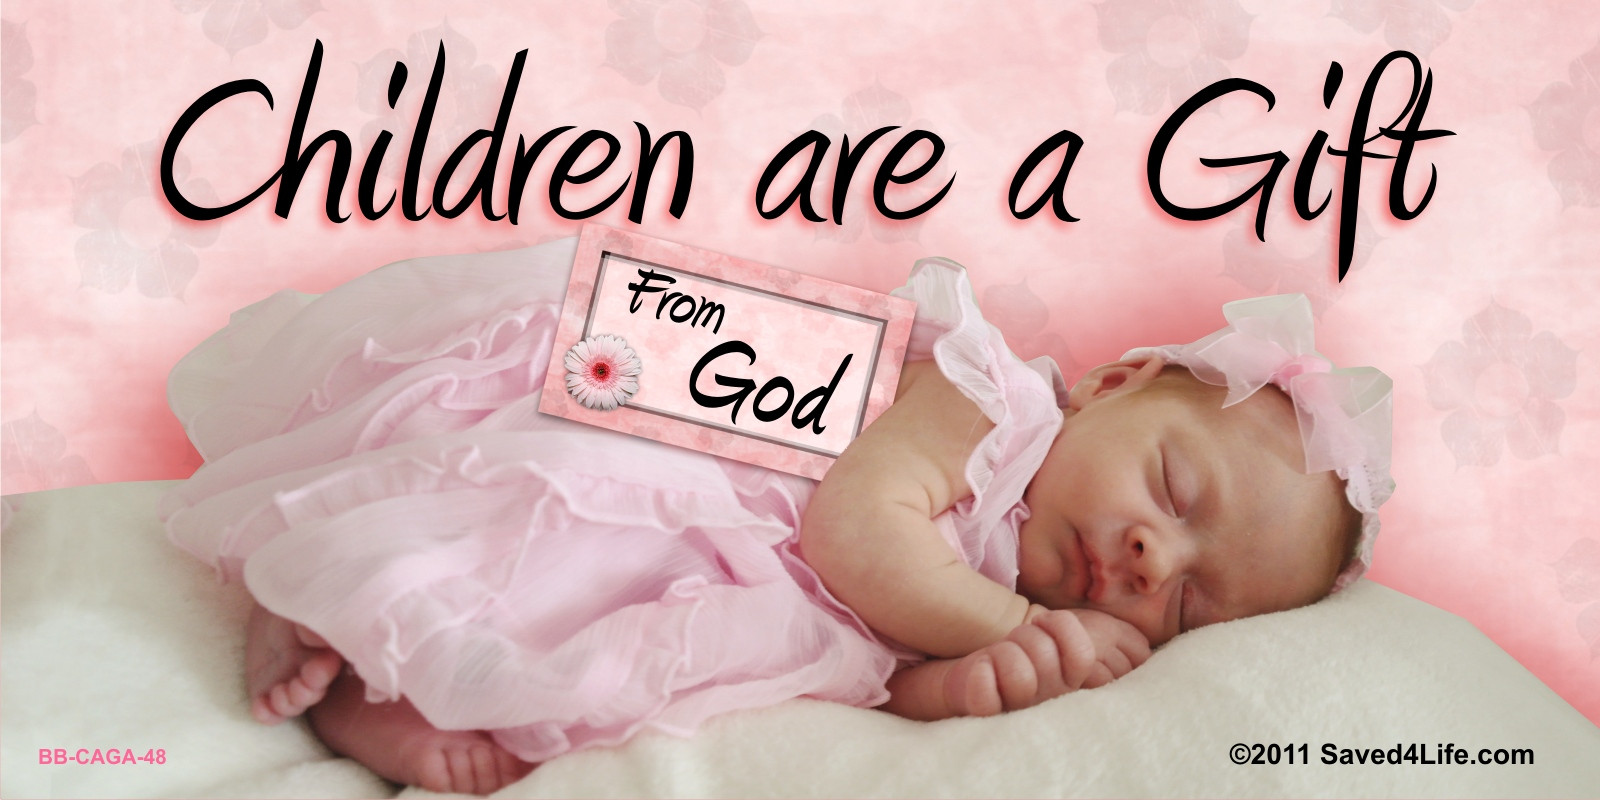 Children Are Gift From God
 Just saw a gem of a bumper sticker childfree